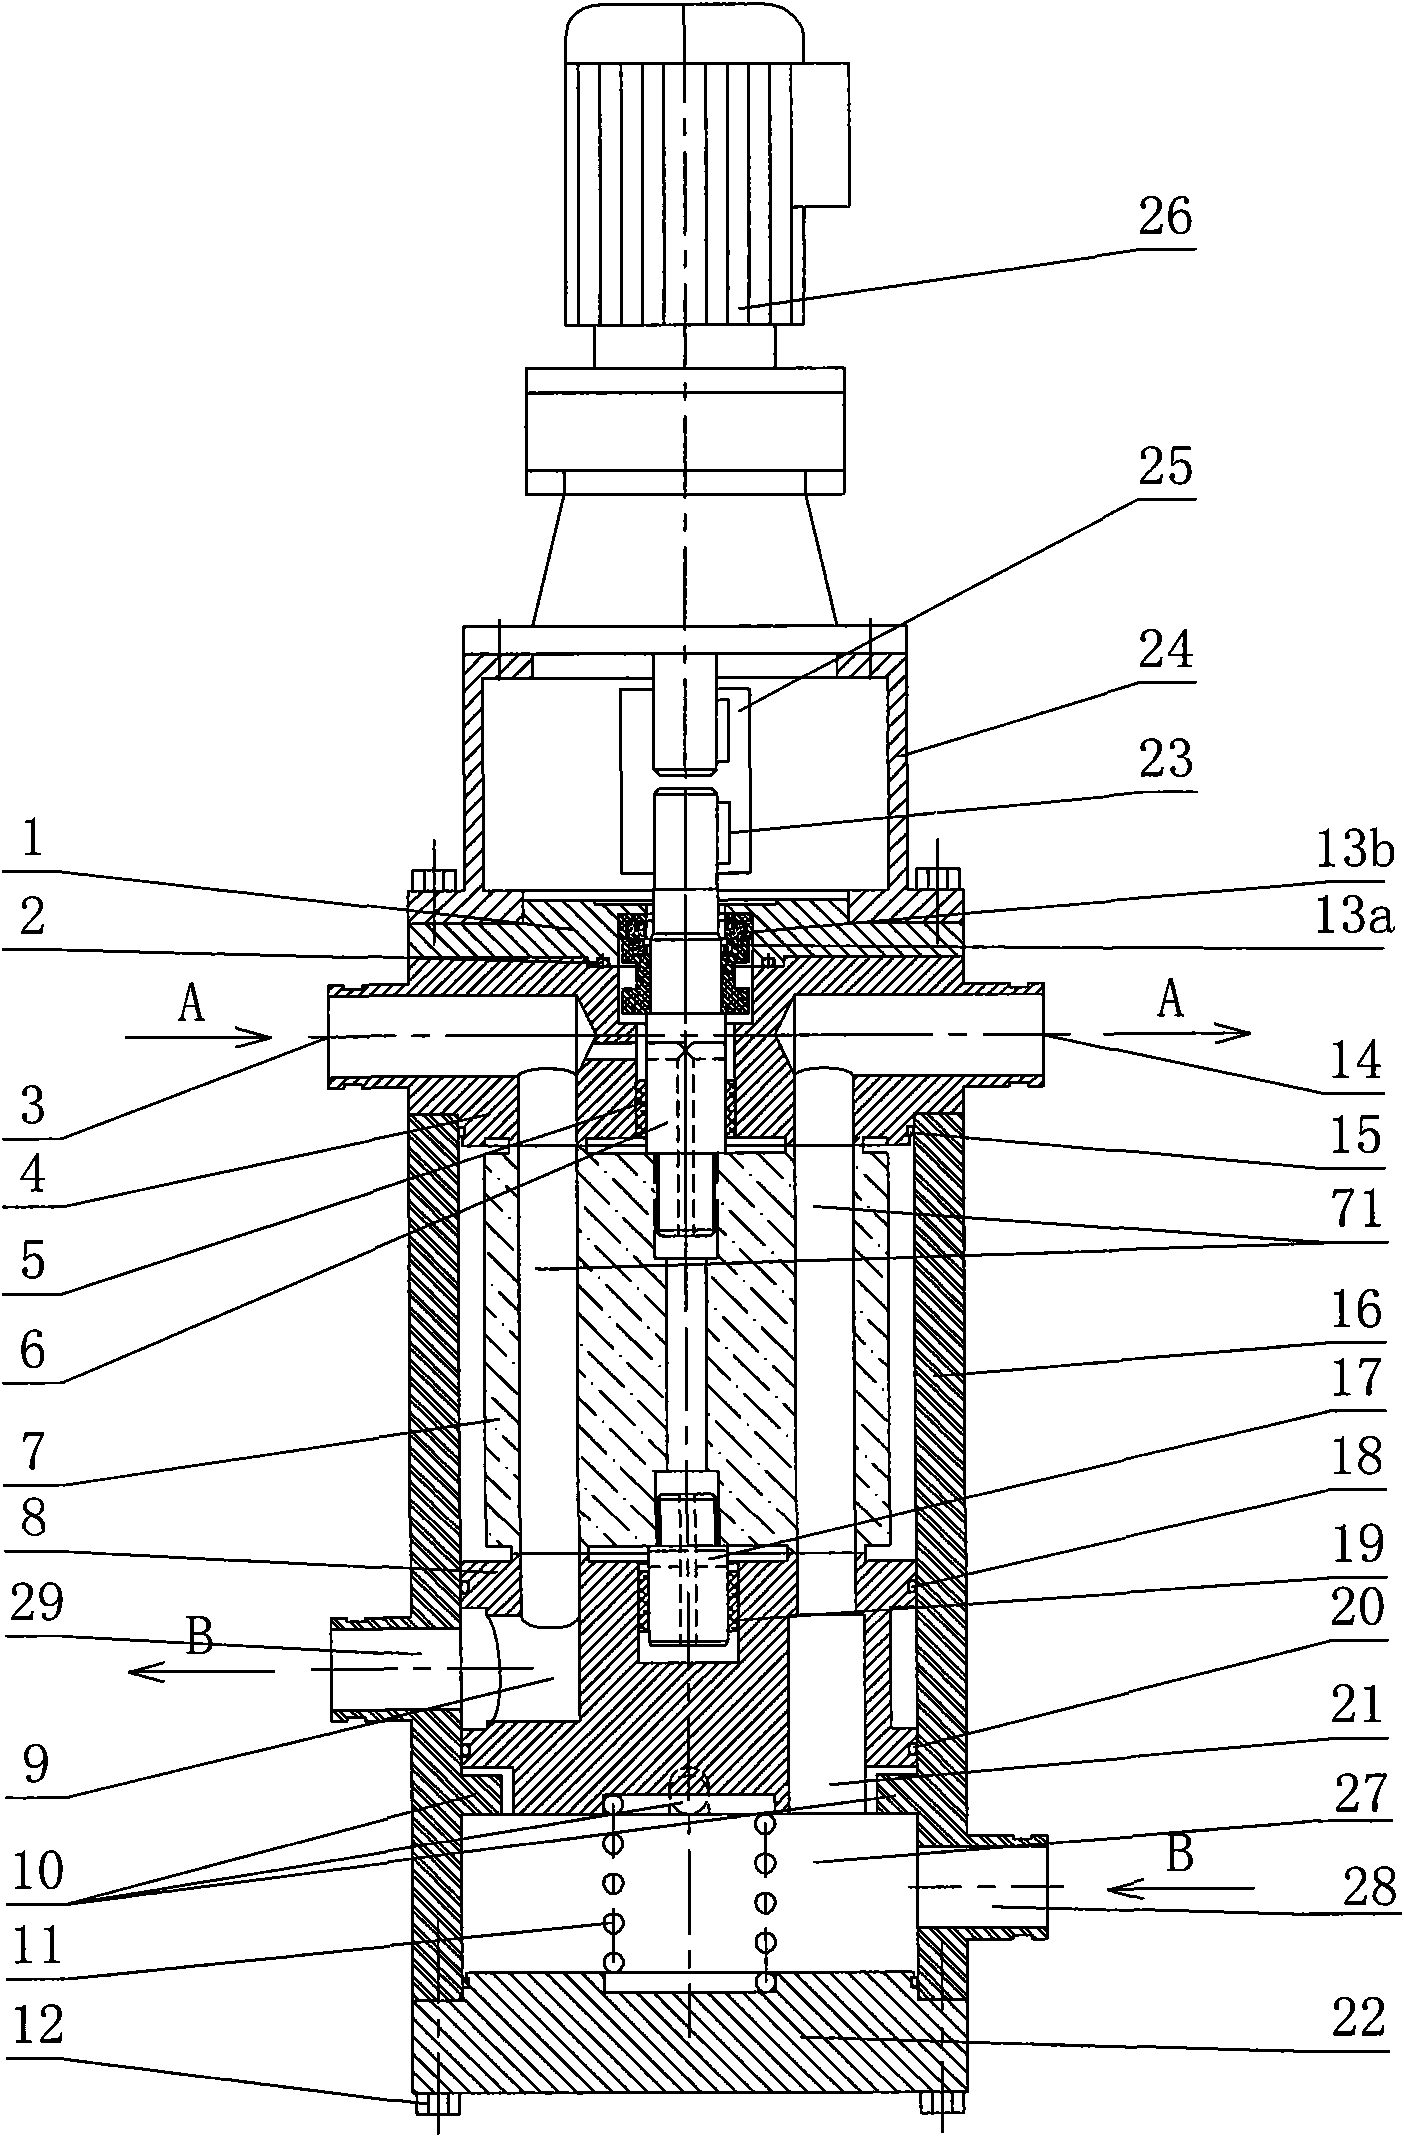 Liquid excess pressure energy recovery device